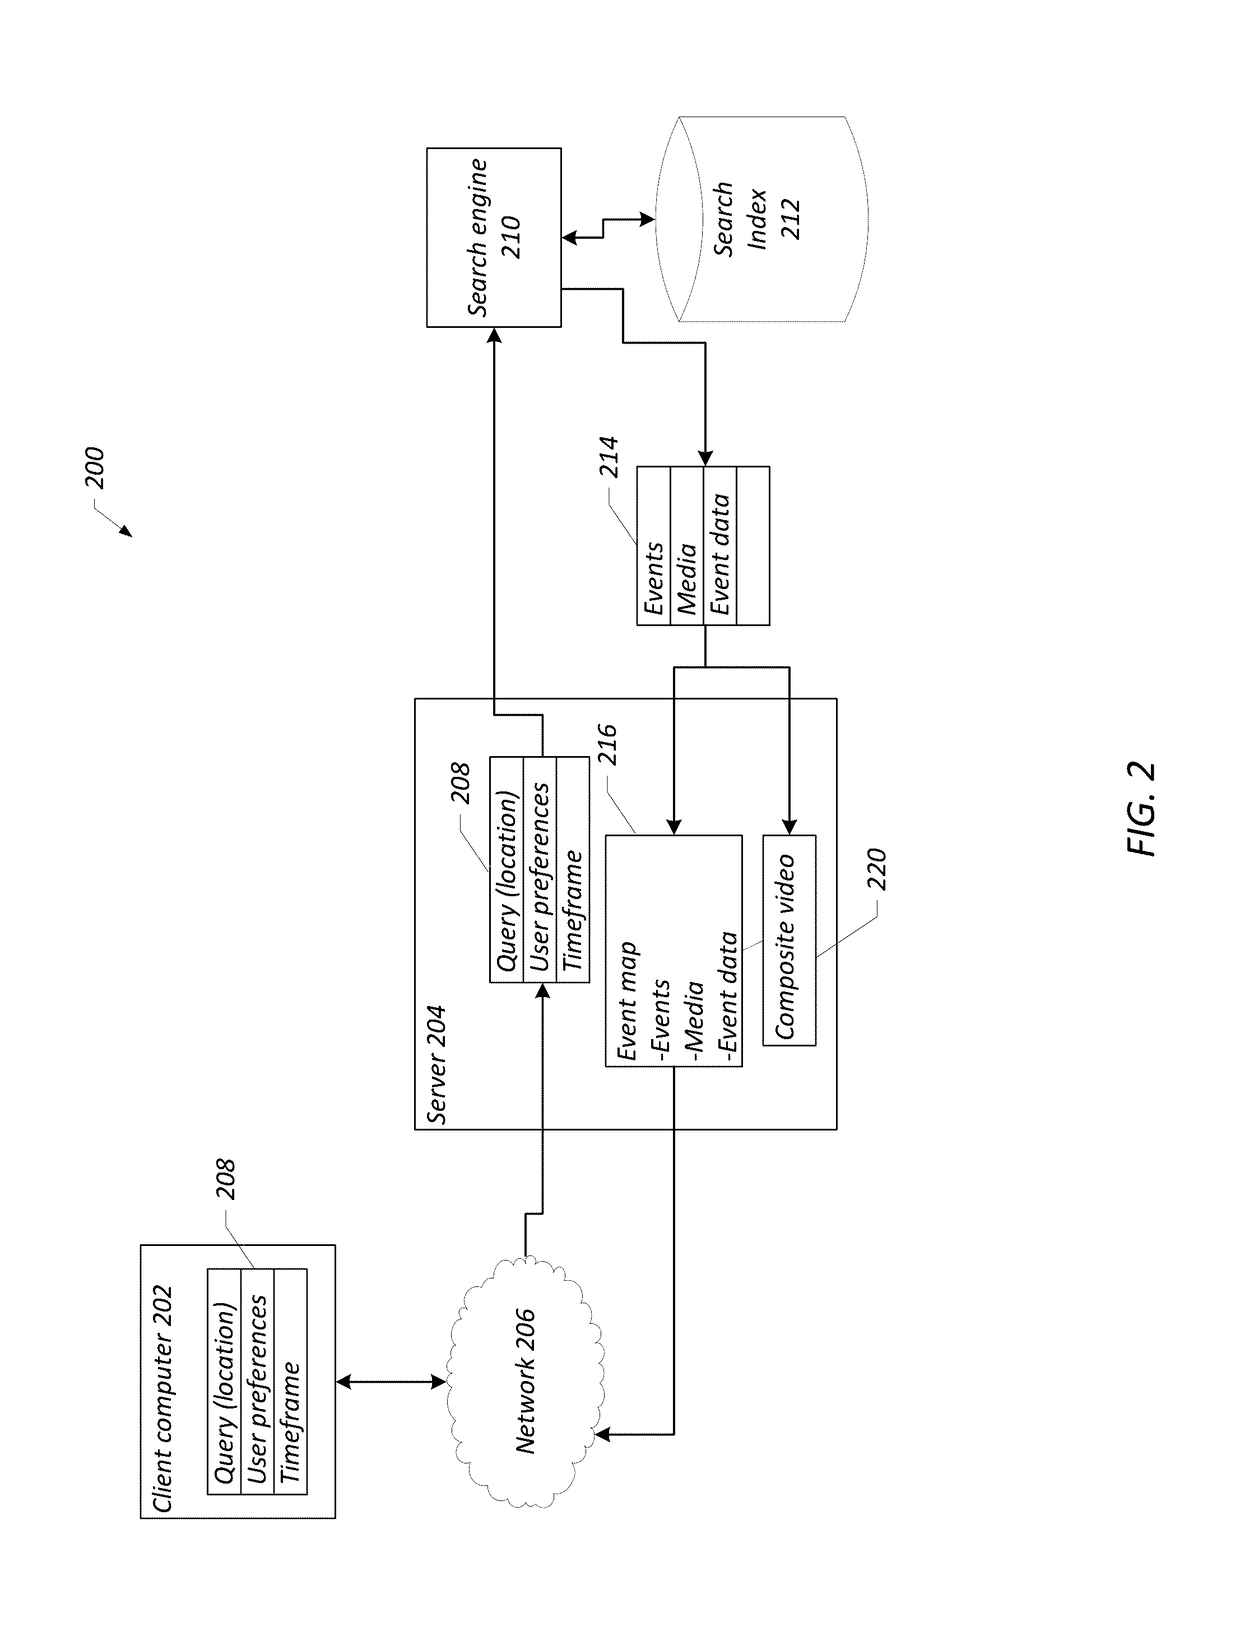 Systems and methods for providing an event map